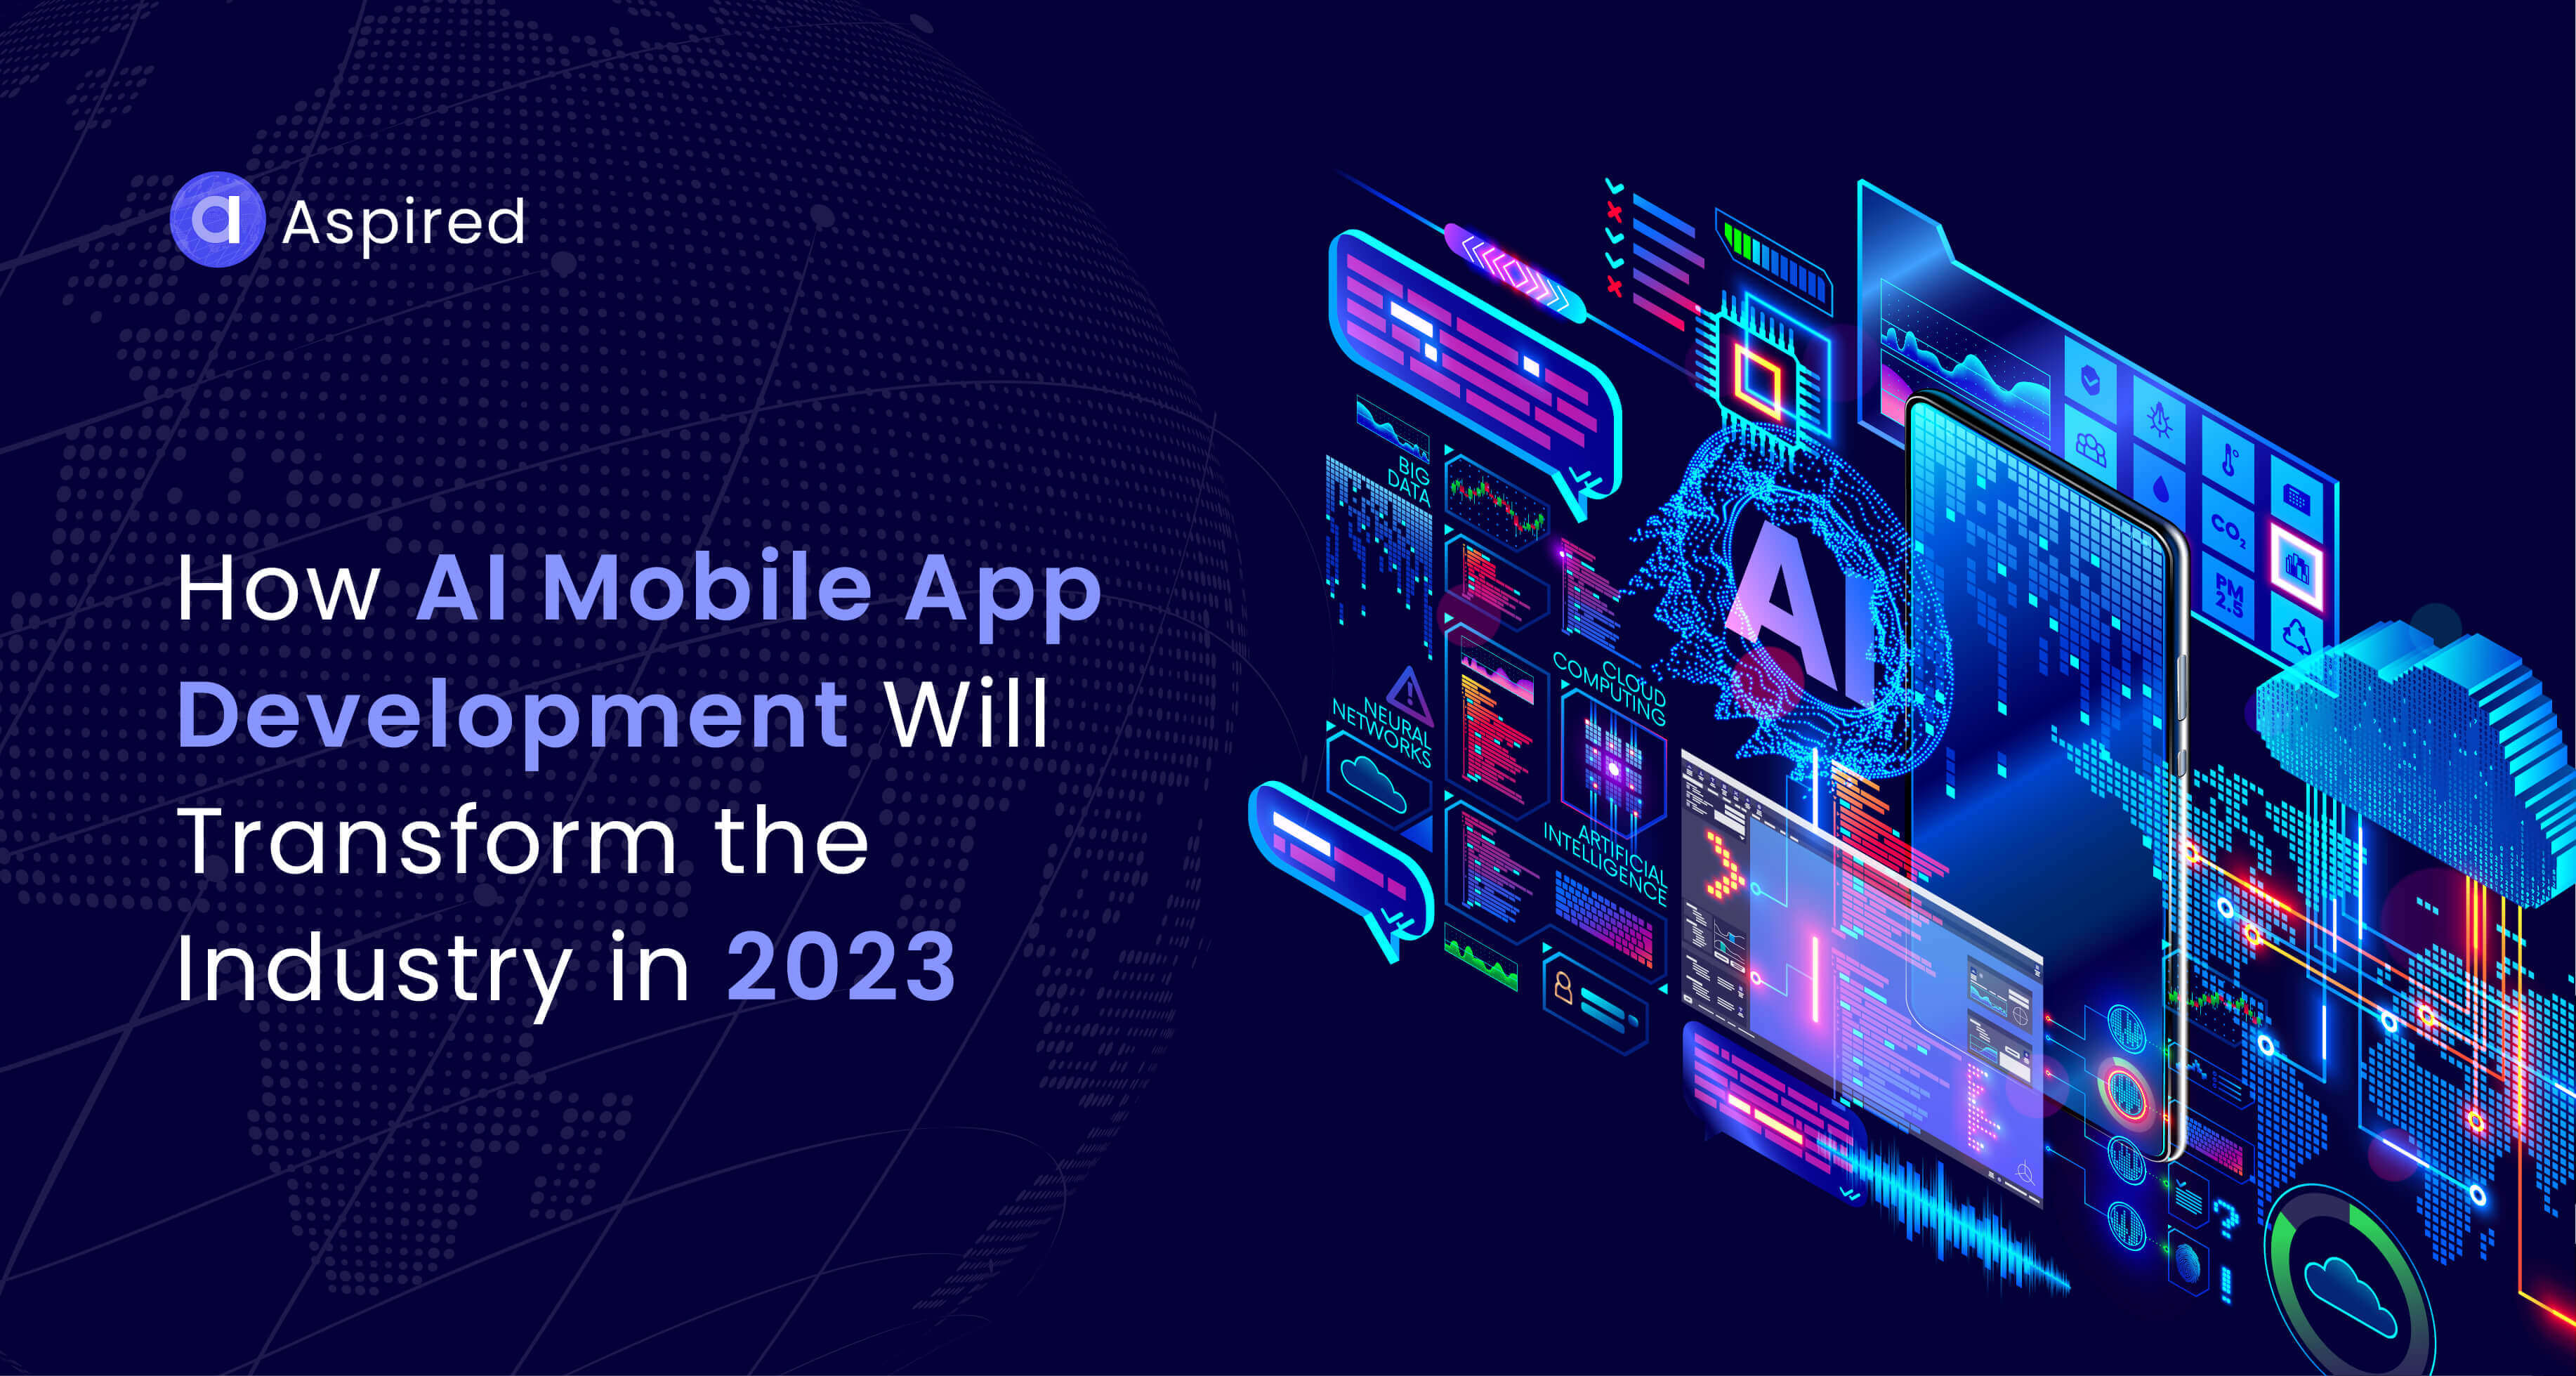 How AI Mobile App Development Will Transform the Industry in 2023